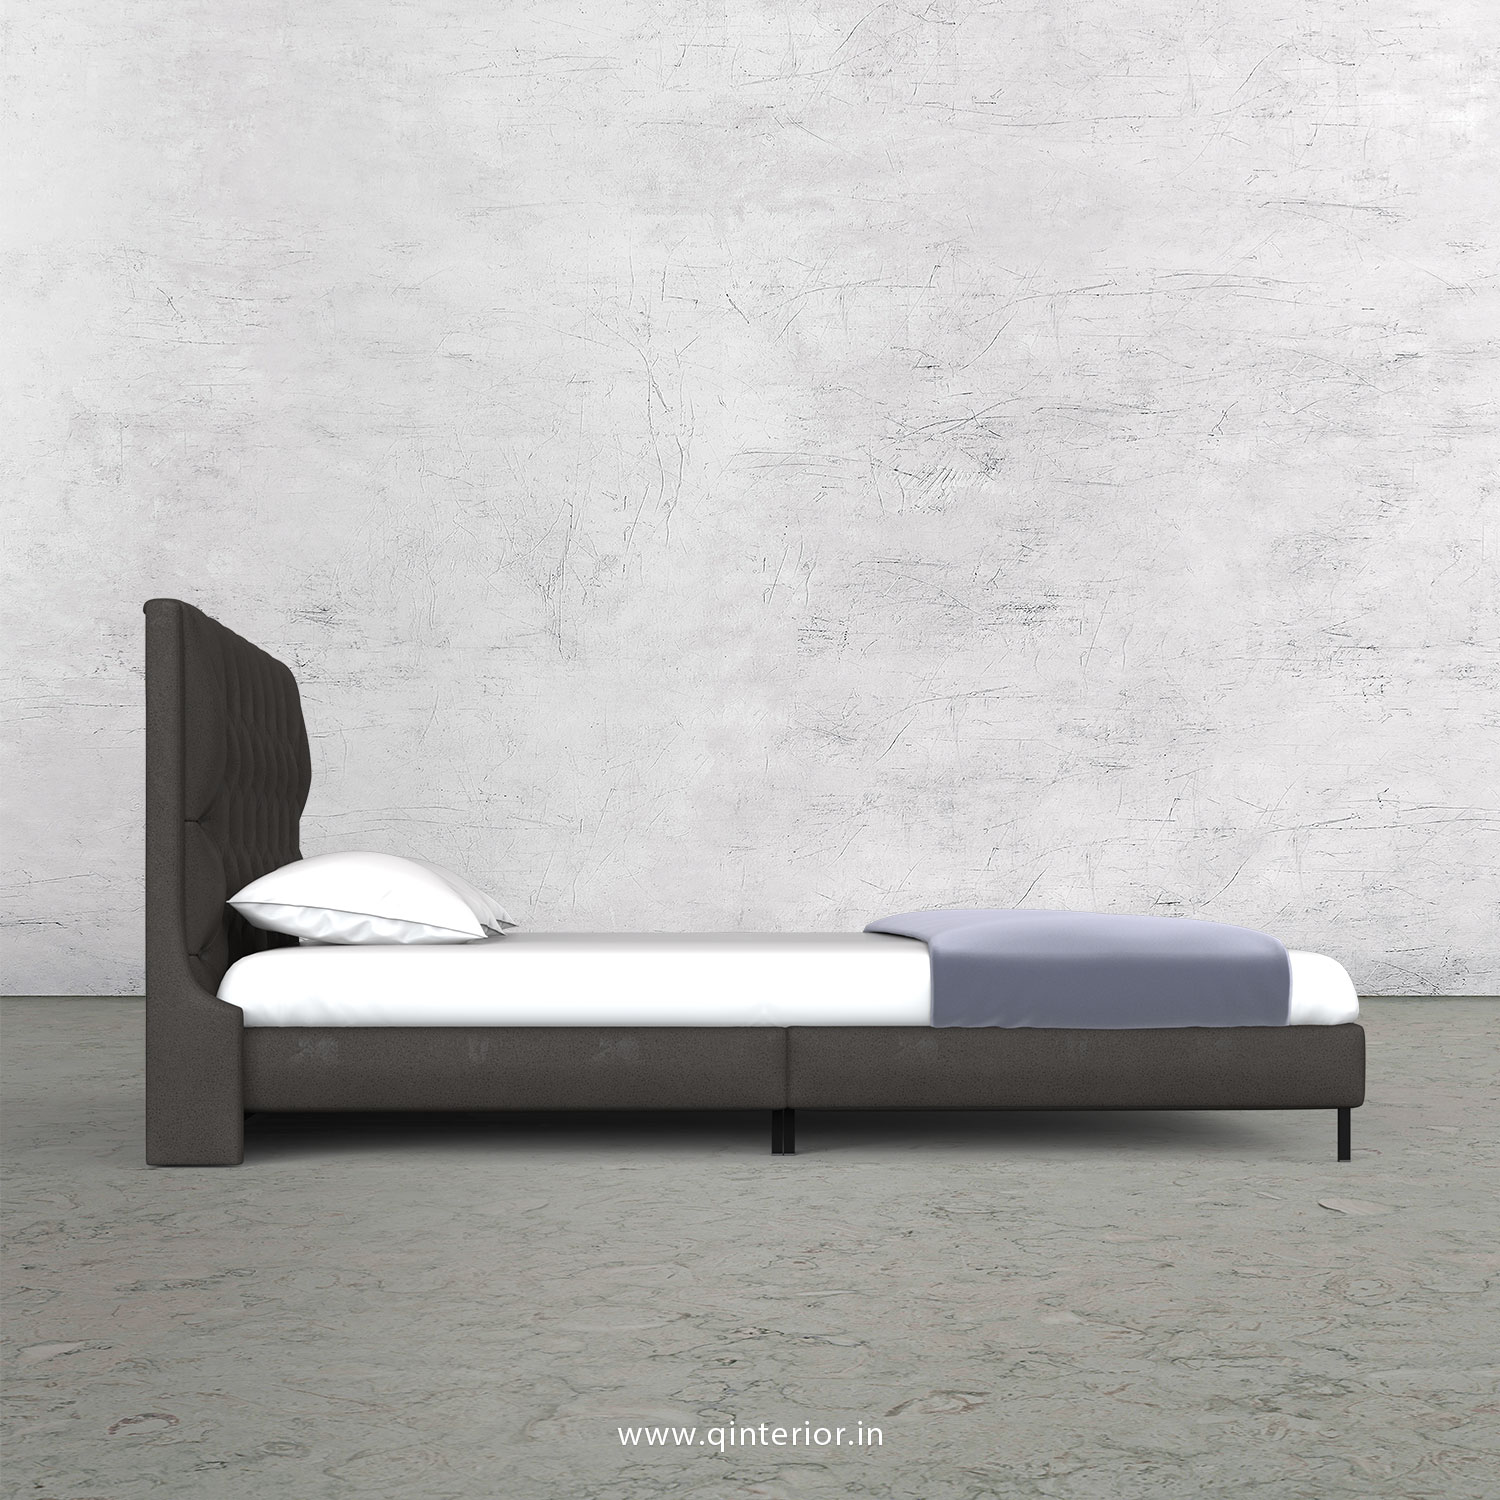 Scorpius King Size Bed in Fab Leather Fabric - KBD003 FL15